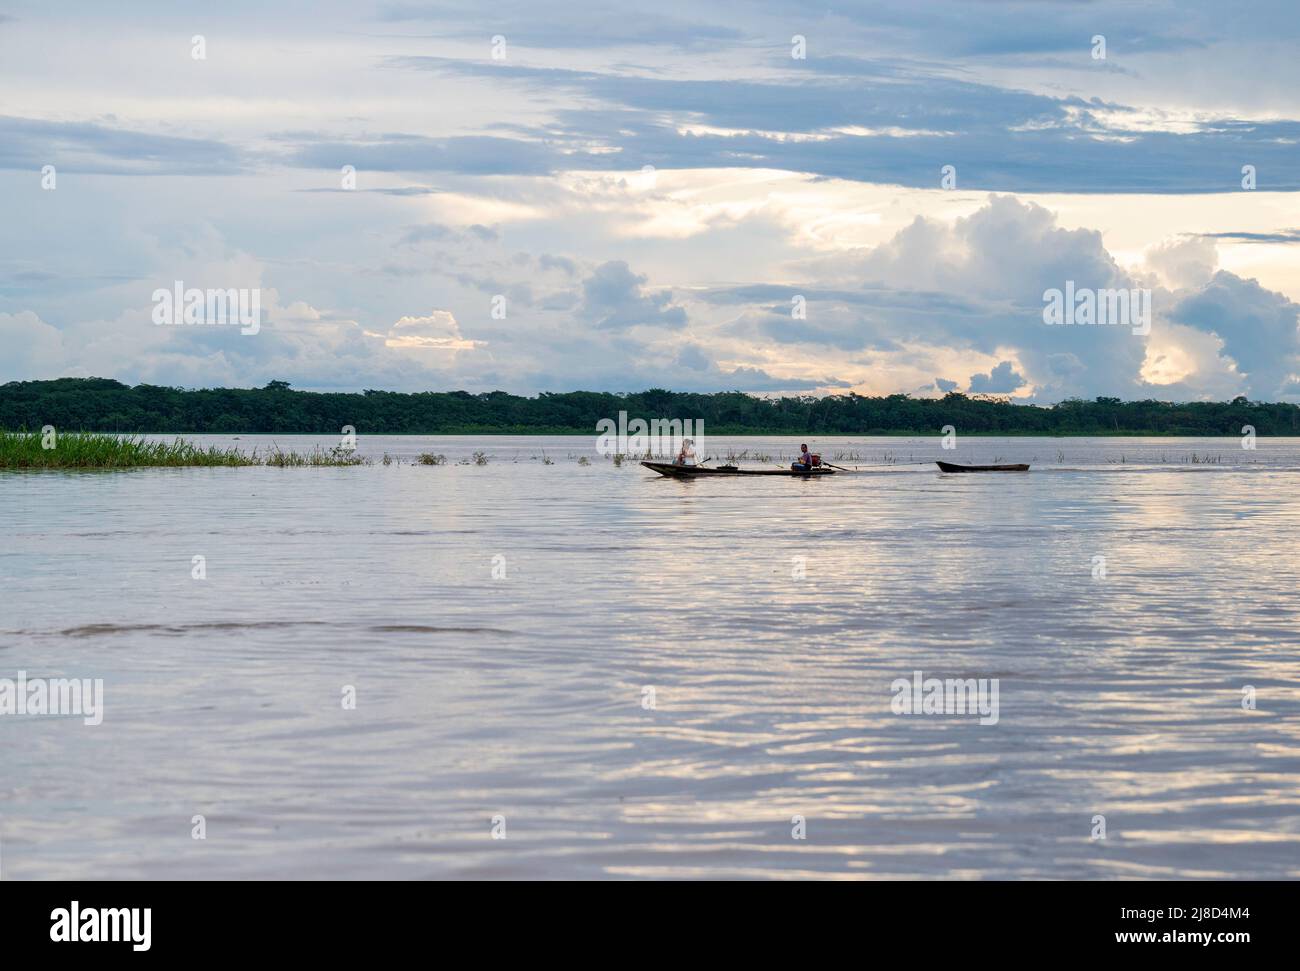 Local people returning from fishing at dusk on the Peruvian Amazon Stock Photo